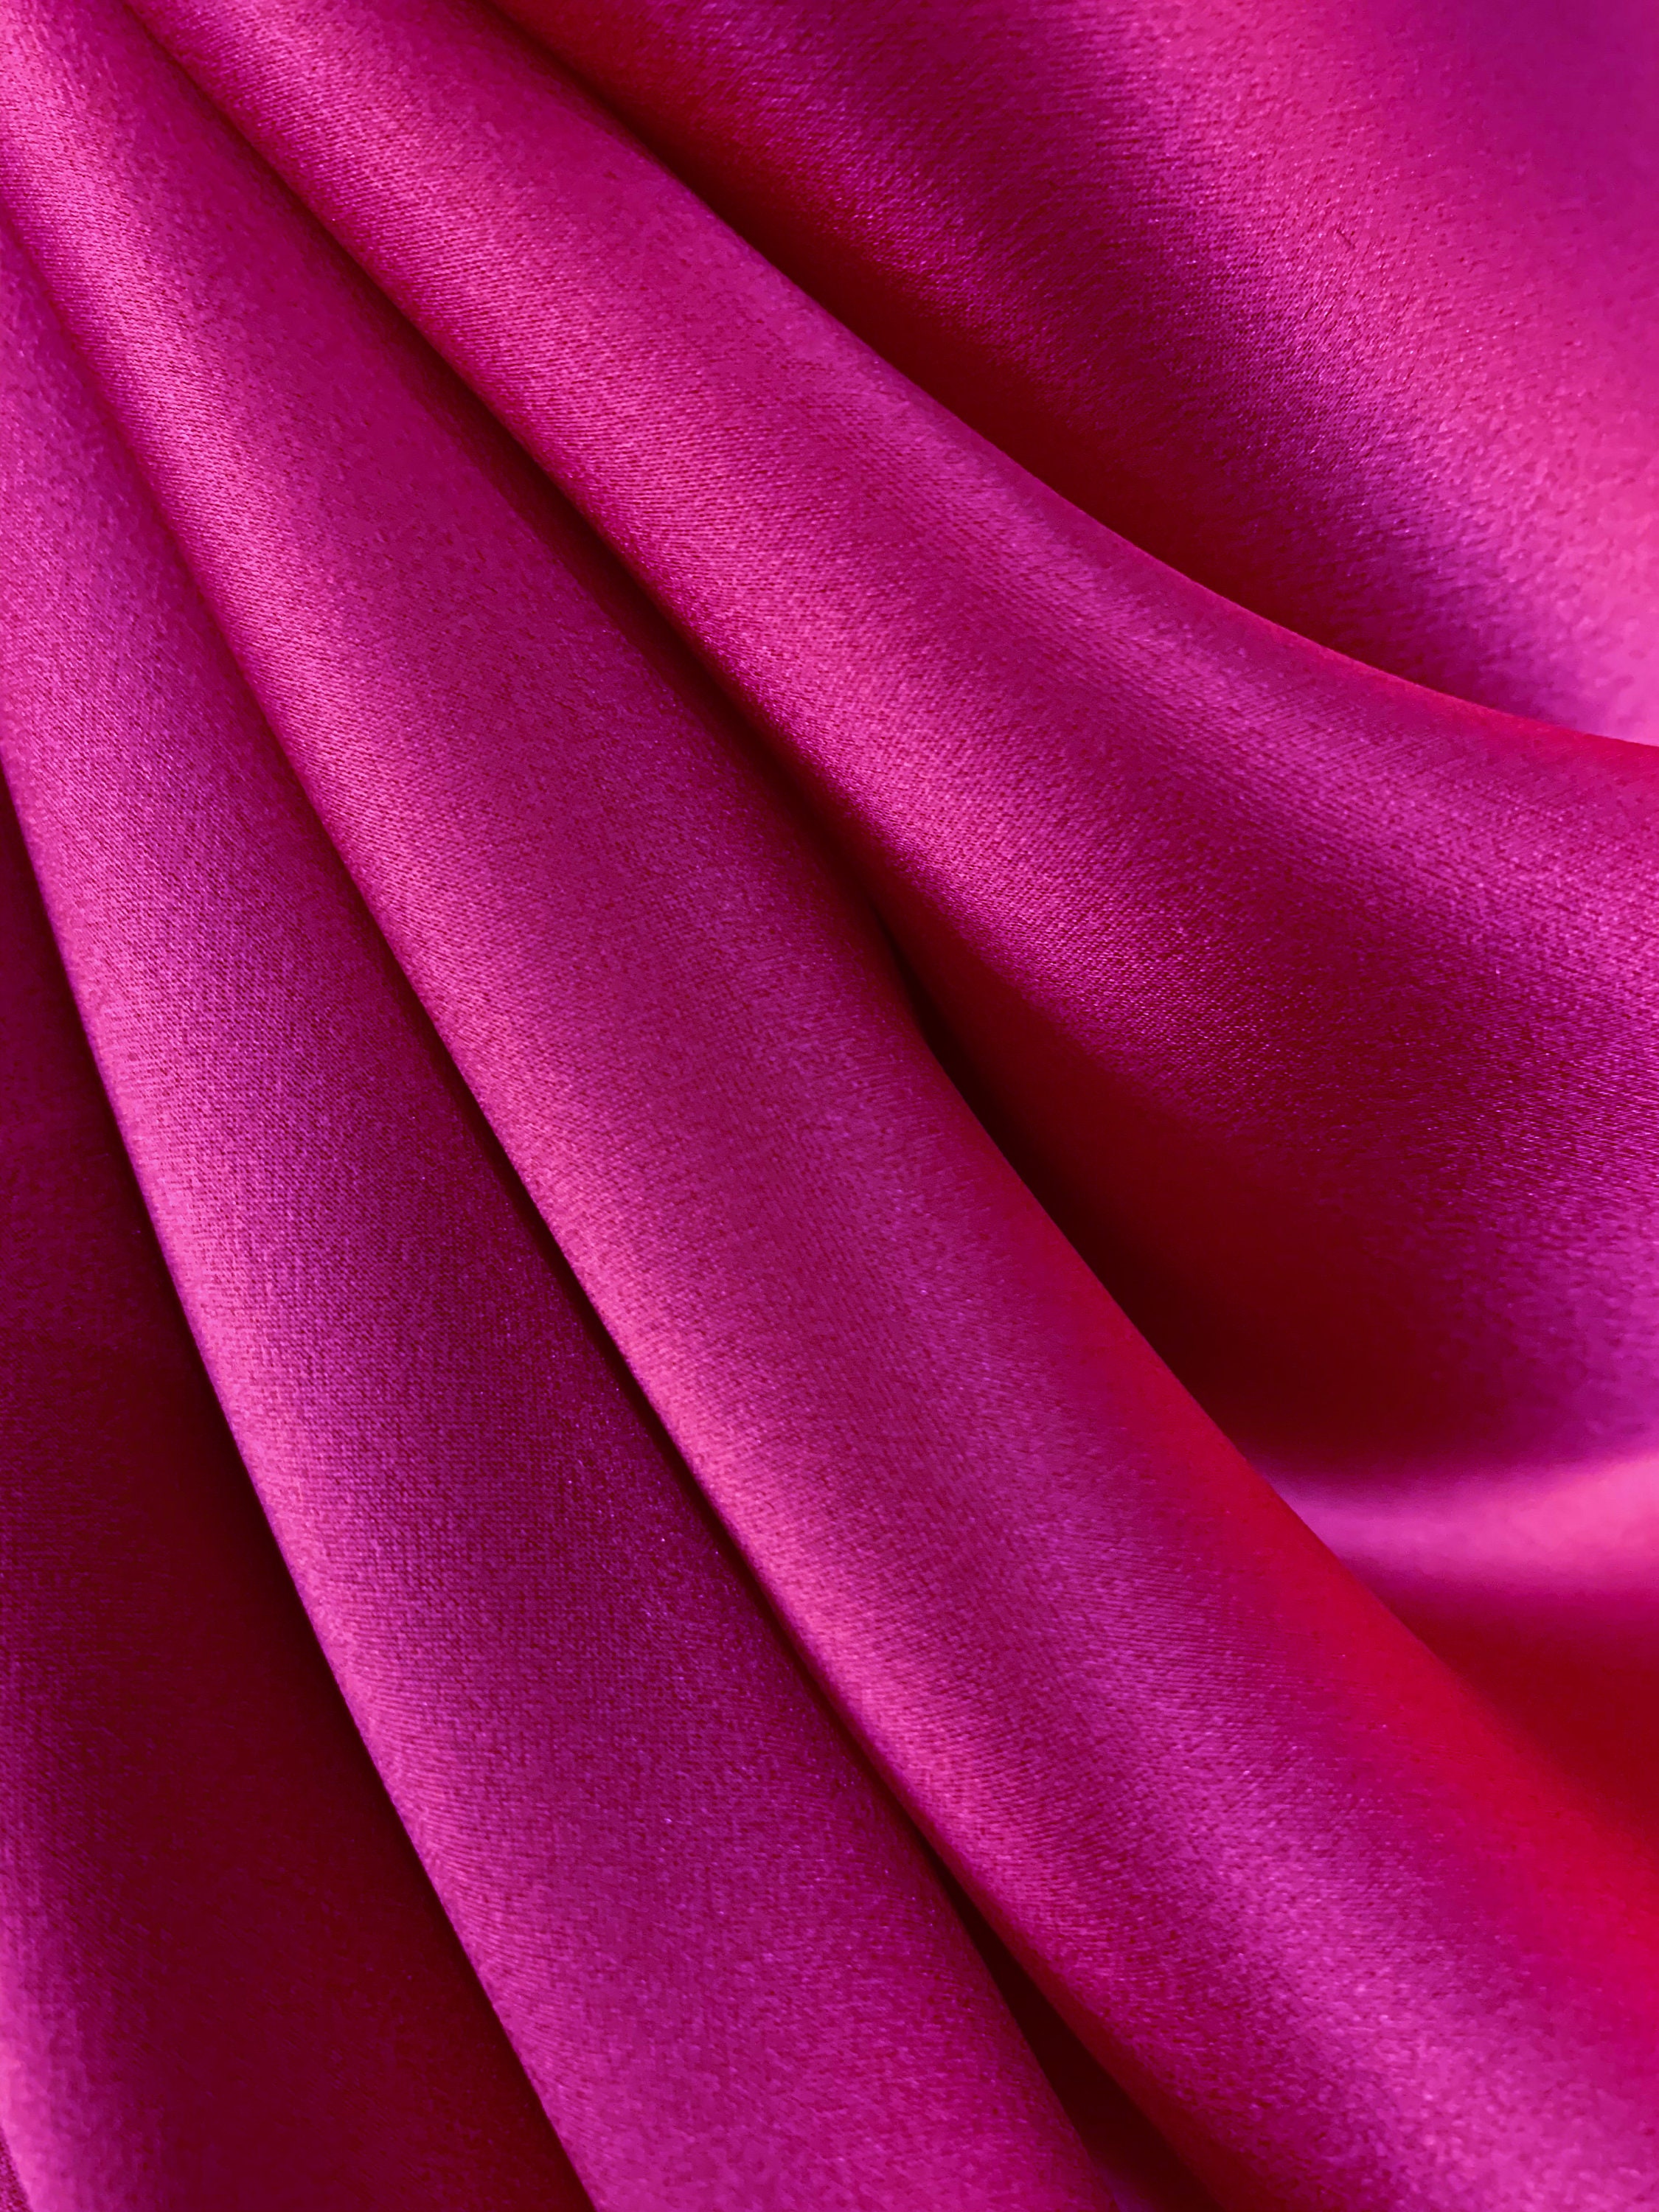 Raspberry 100% Pure Mulberry Silk Fabric 19 Momme Silk by the - Etsy